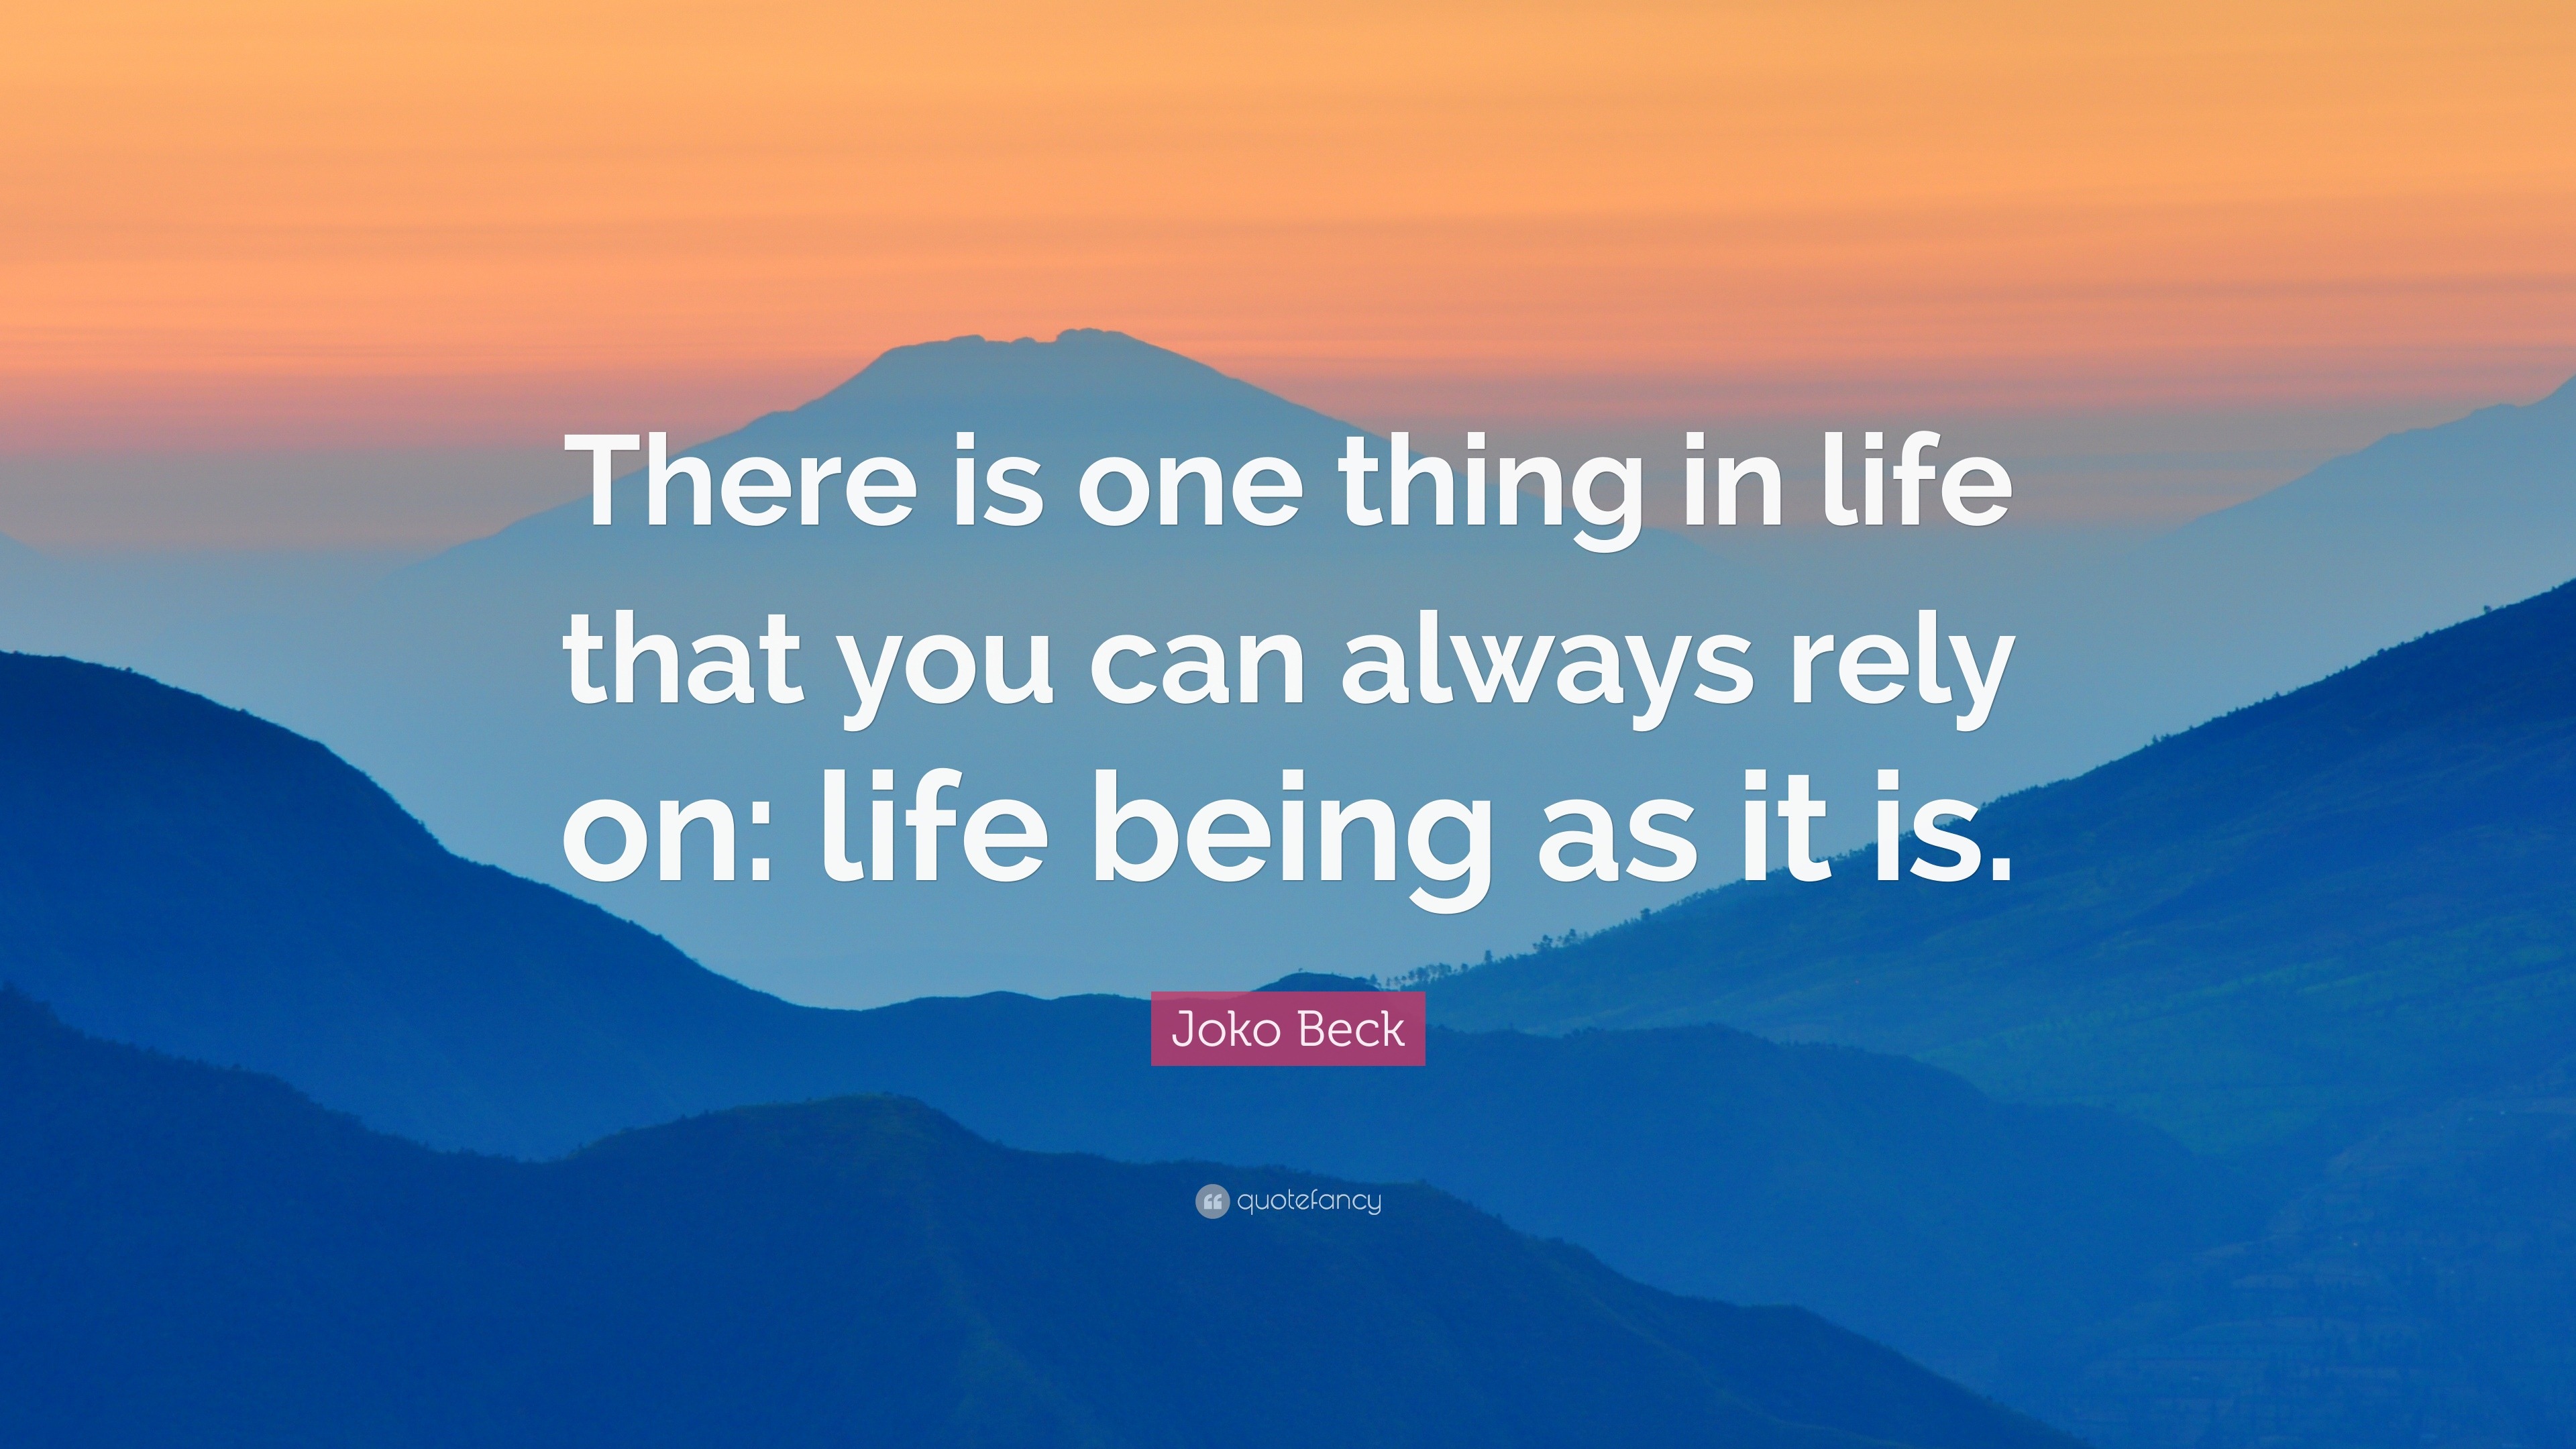 Joko Beck Quote: “There is one thing in life that you can always rely ...